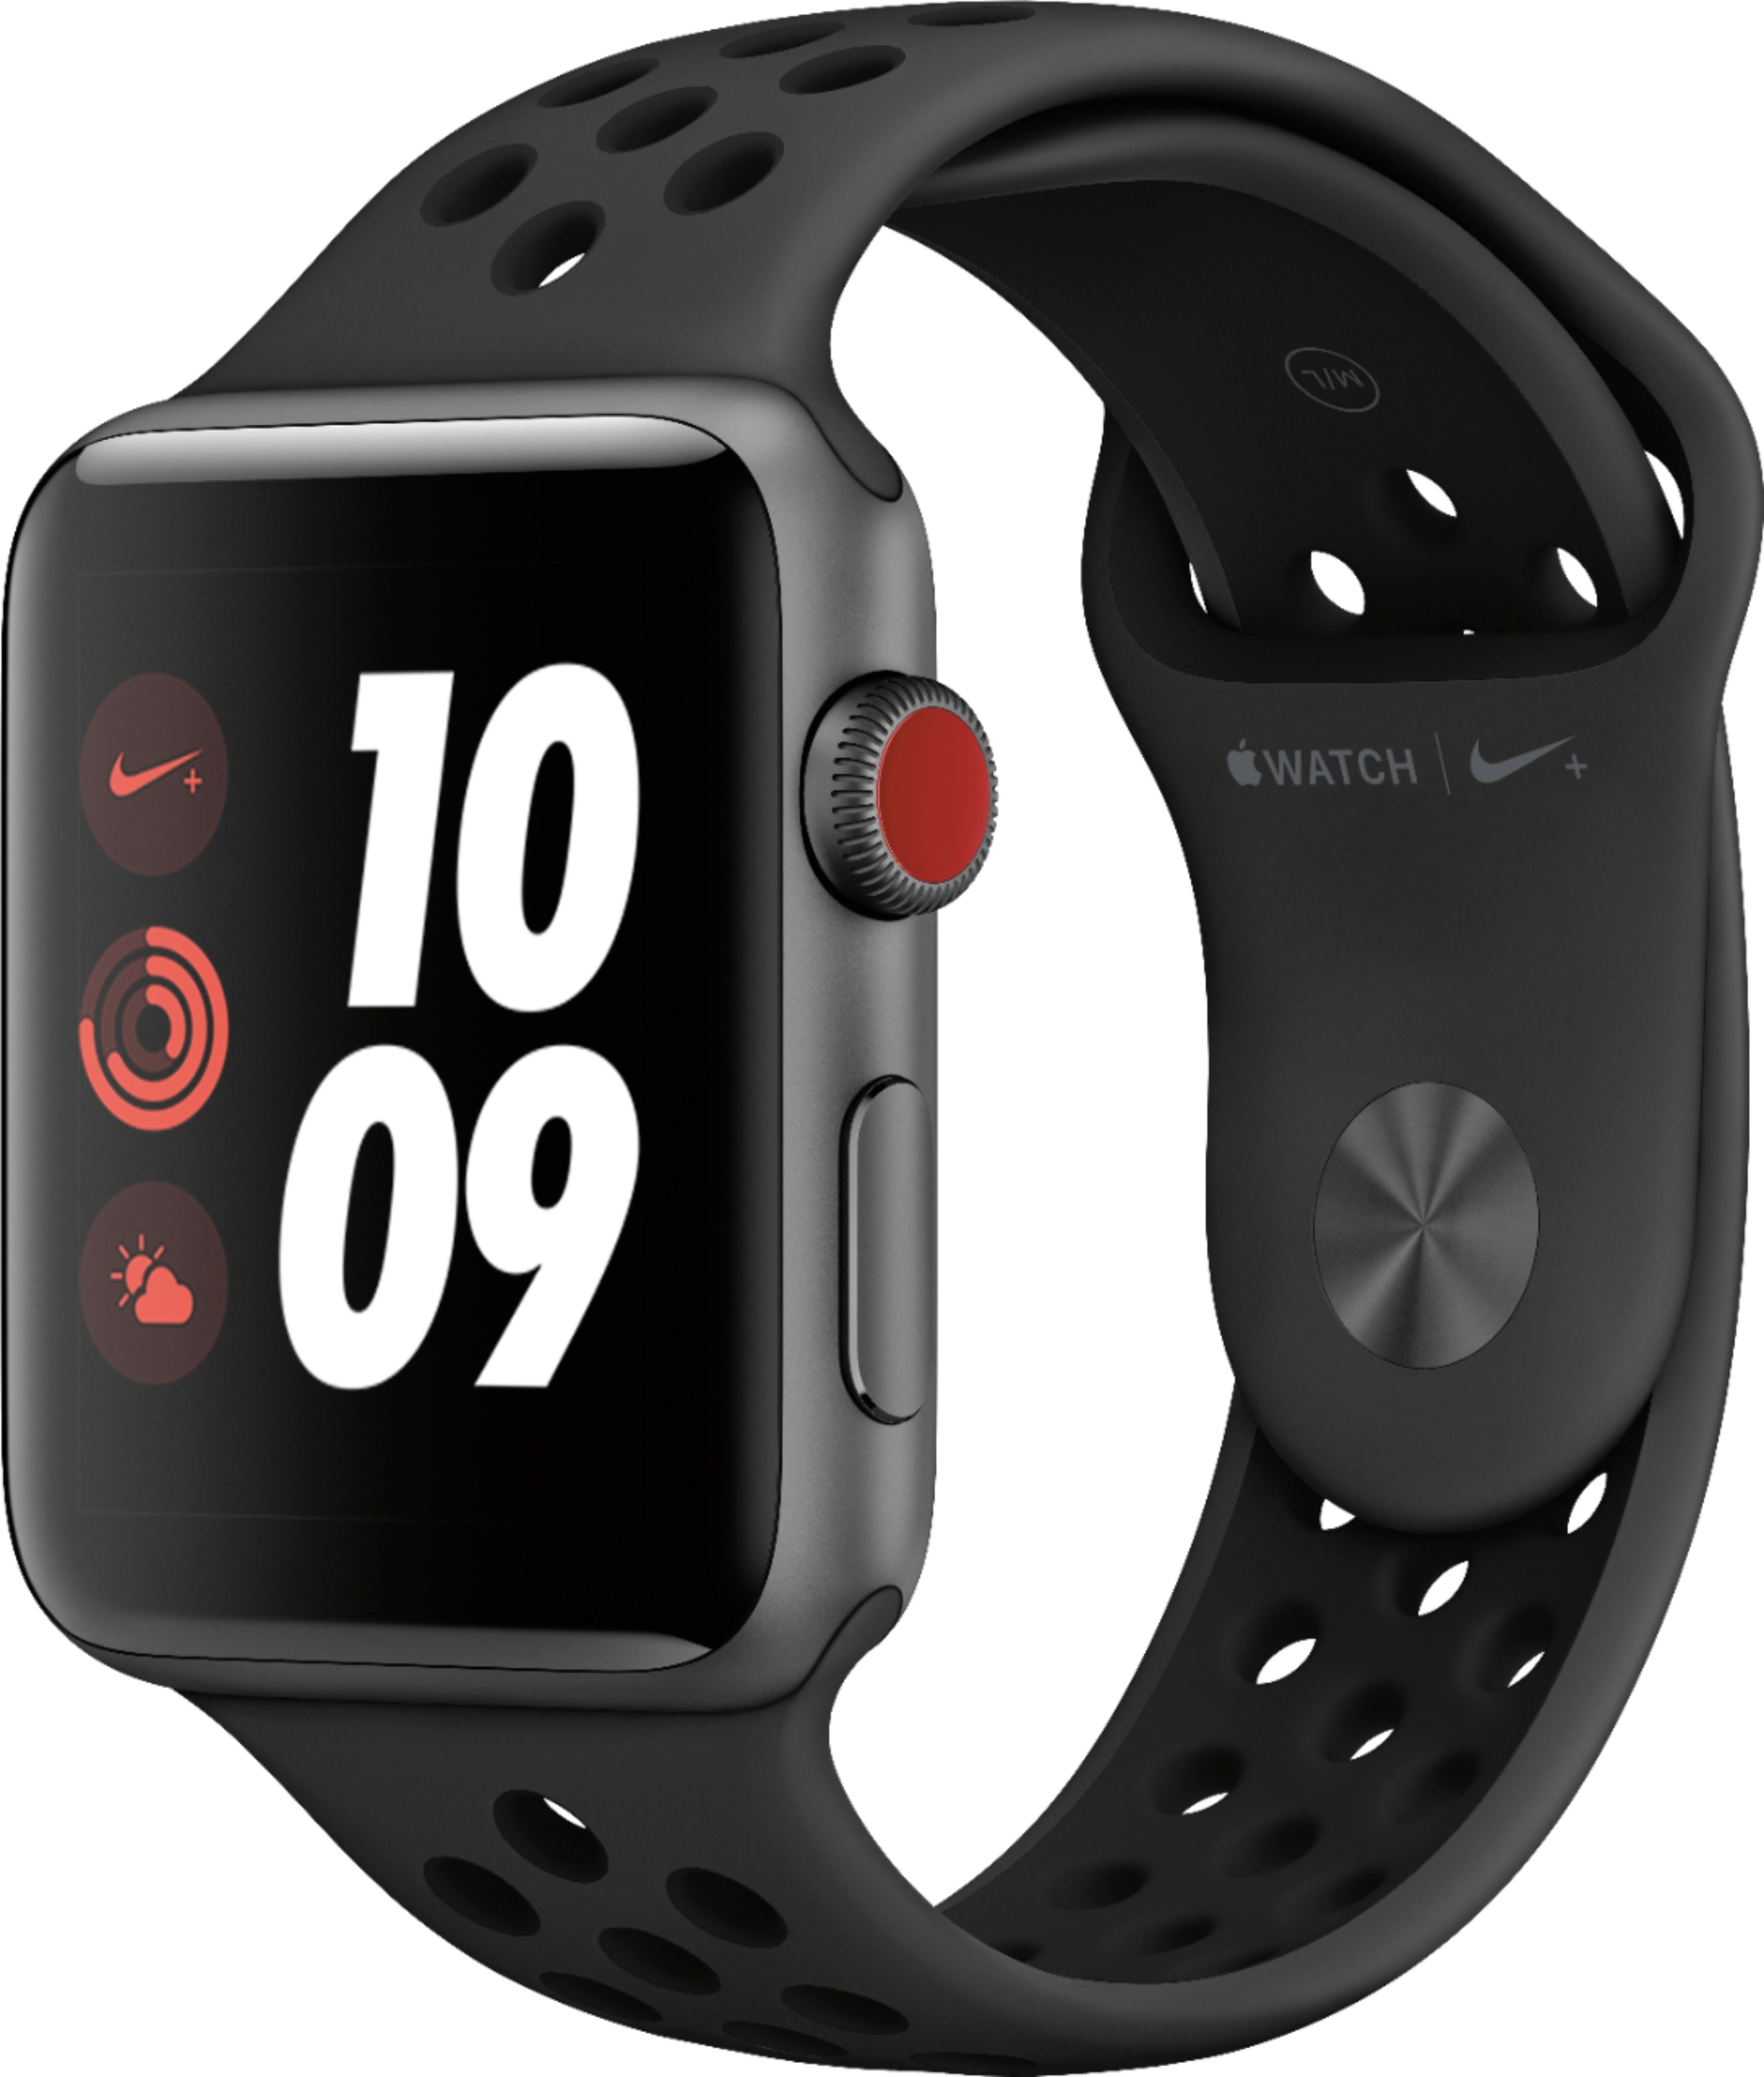 recept Conceit mate Best Buy: Apple Watch Nike+ Series 3 (GPS + Cellular) 42mm Space Gray  Aluminum Case with Anthracite/Black Nike Sport Band Space Gray Aluminum  MTGW2LL/A